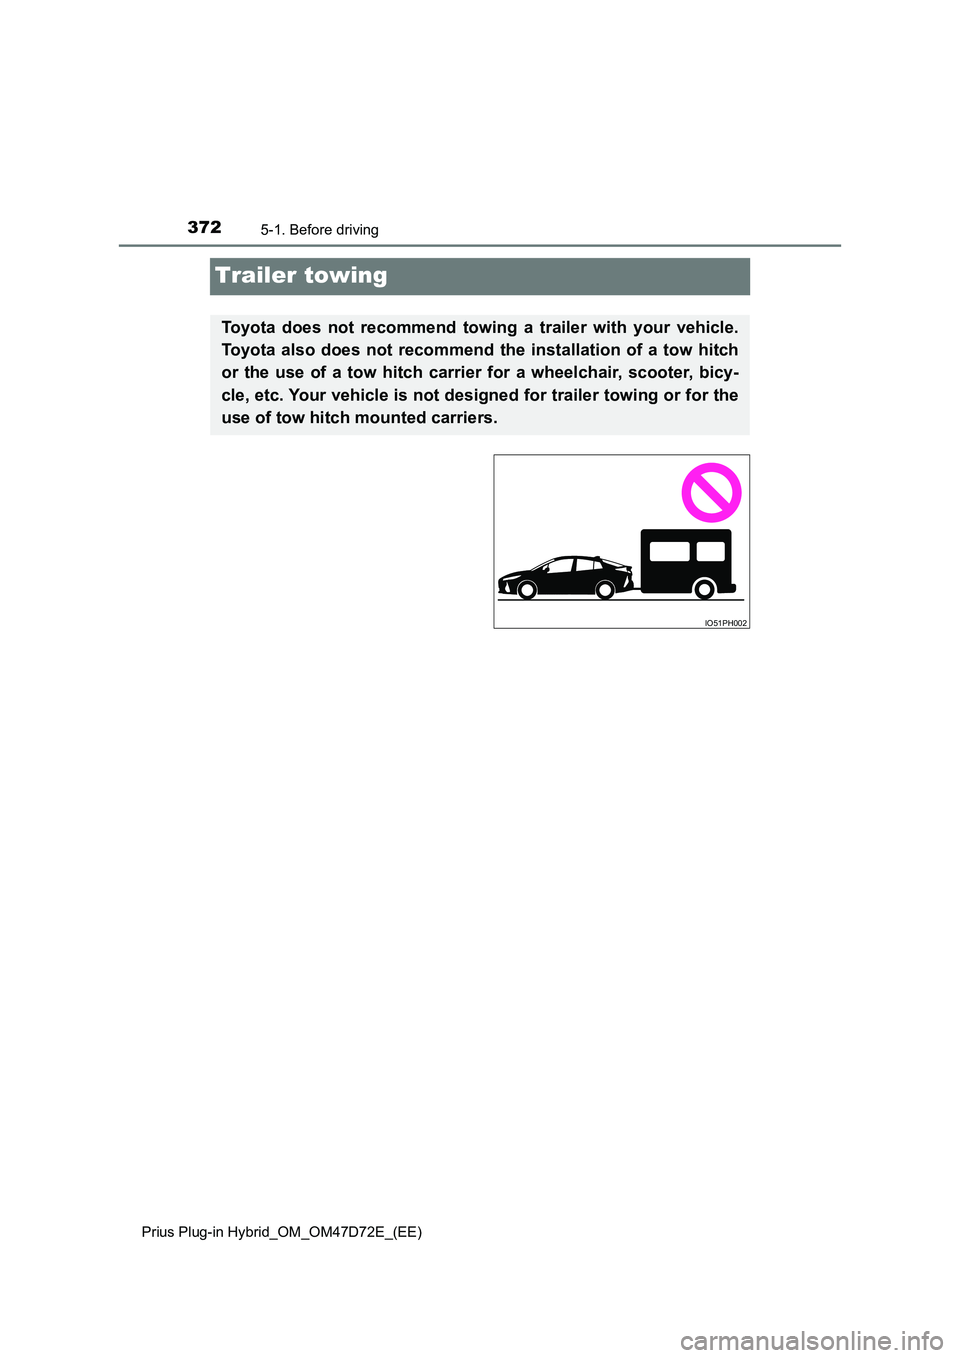 TOYOTA PRIUS PLUG-IN HYBRID 2021  Owners Manual 3725-1. Before driving 
Prius Plug-in Hybrid_OM_OM47D72E_(EE)
Trailer towing
Toyota does not recommend towing a trailer with your vehicle. 
Toyota also does not recommend the installation of a tow hit